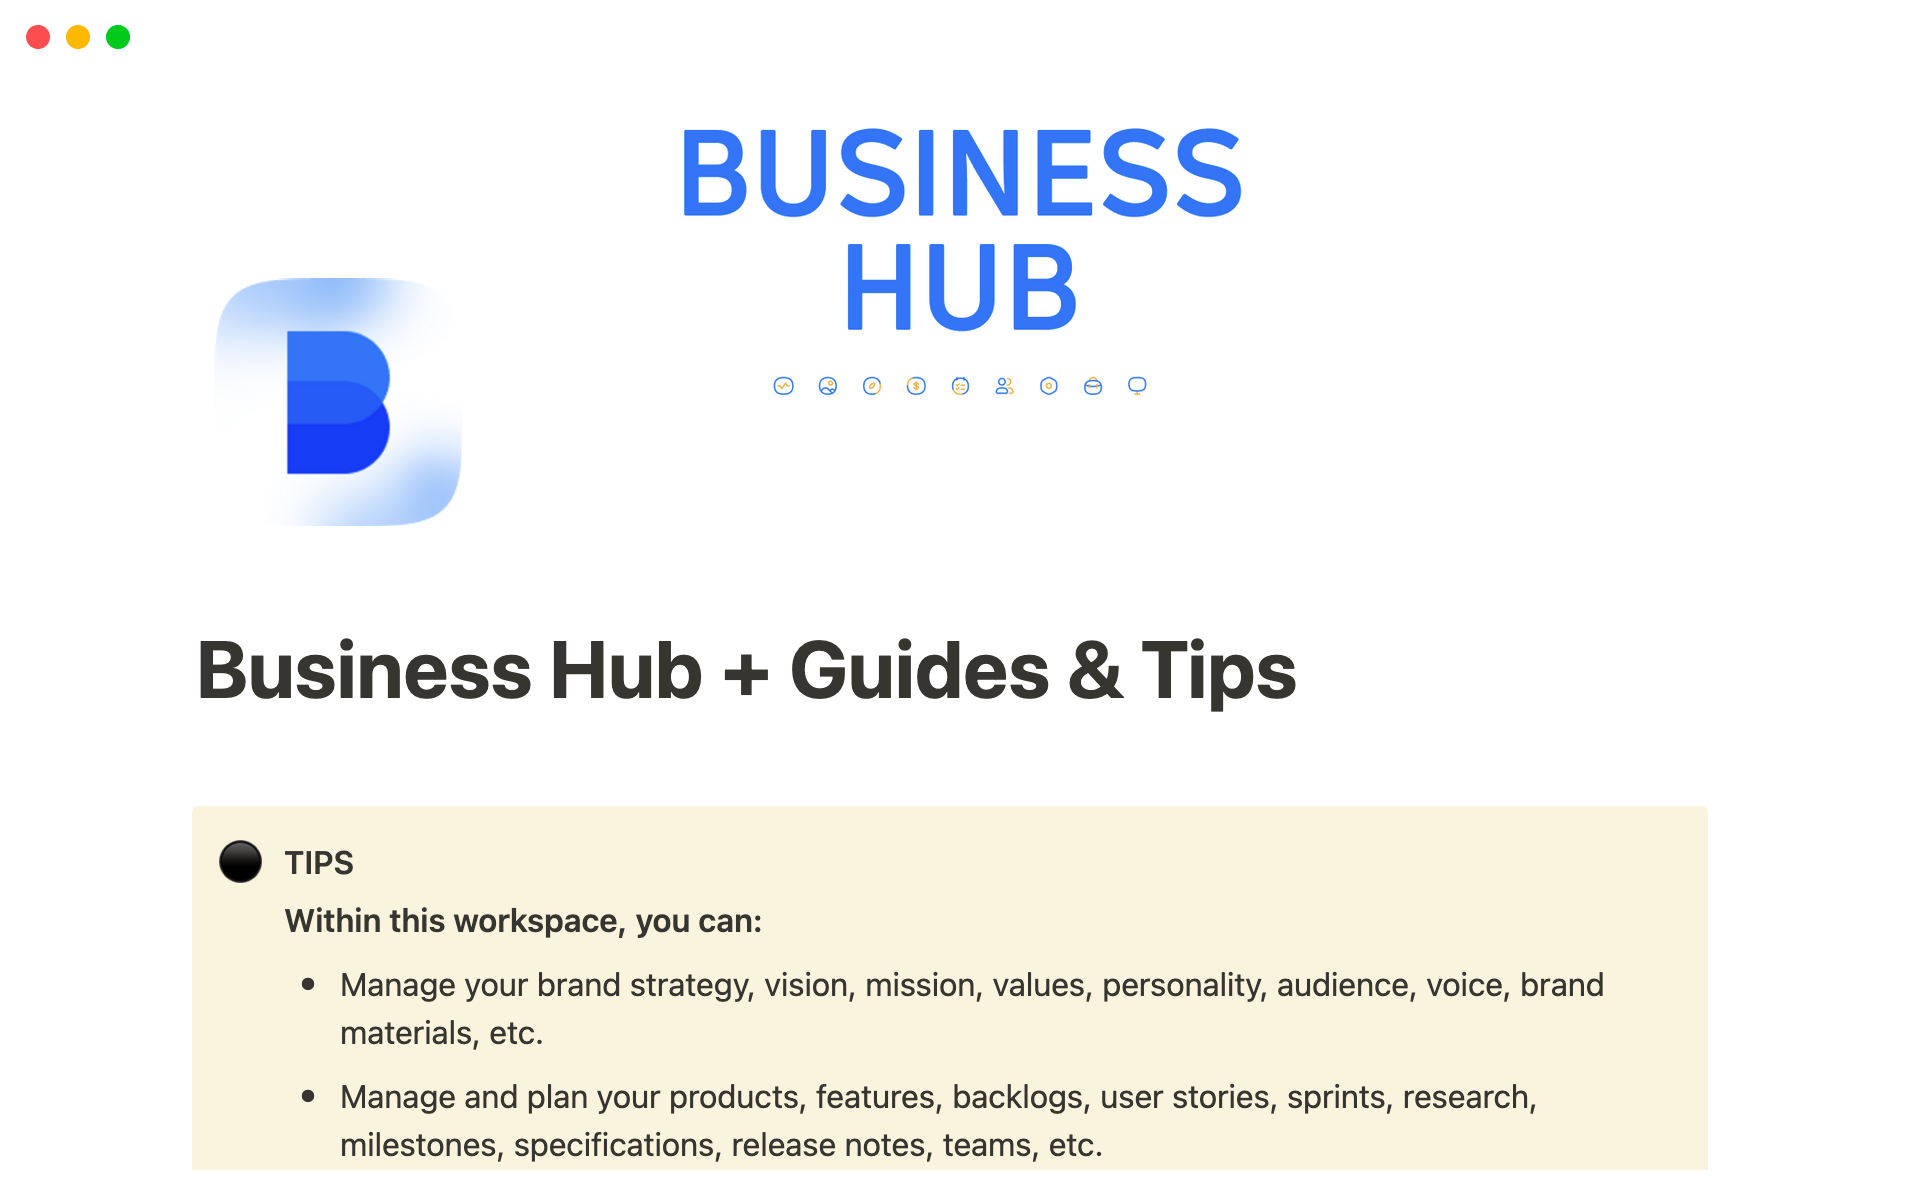 Business Hub provides a workspace for businesses to manage their brand, products, growth, finances, and more.